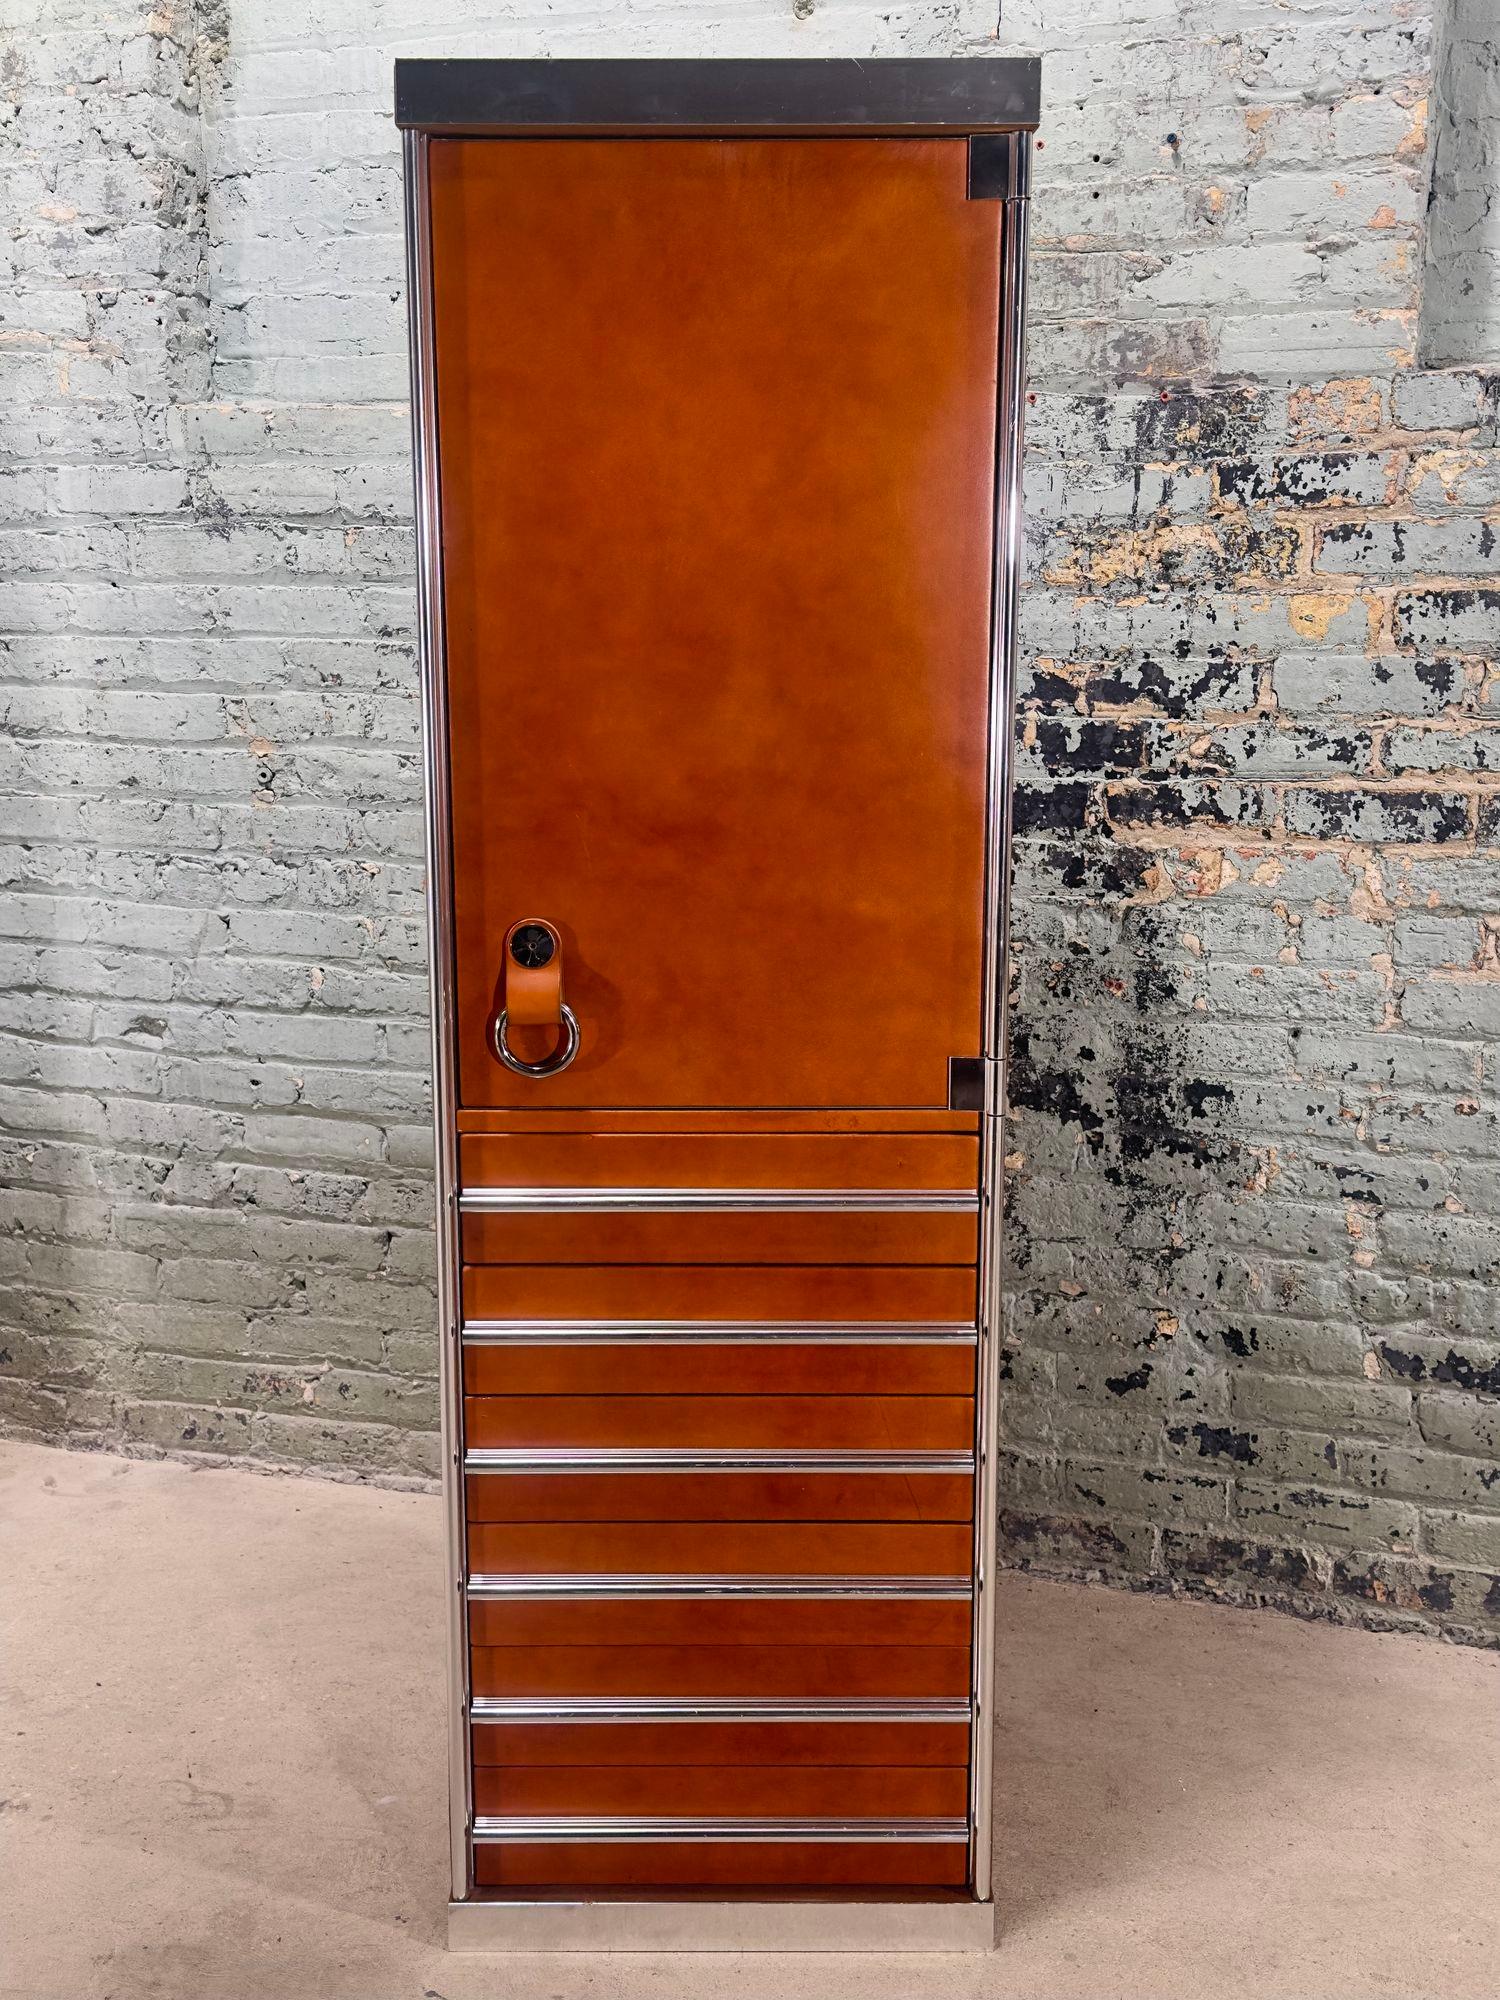 Wardrobe Cabinet/Bar by Guido Faleschini for Mariani/Pace, Italy 1970.
Cabinet has 6 drawers with a light in upper cabinet, with switch on top of cabinet for the light. There is a hanging rod plus pins for shelves (which we do not have) but could be